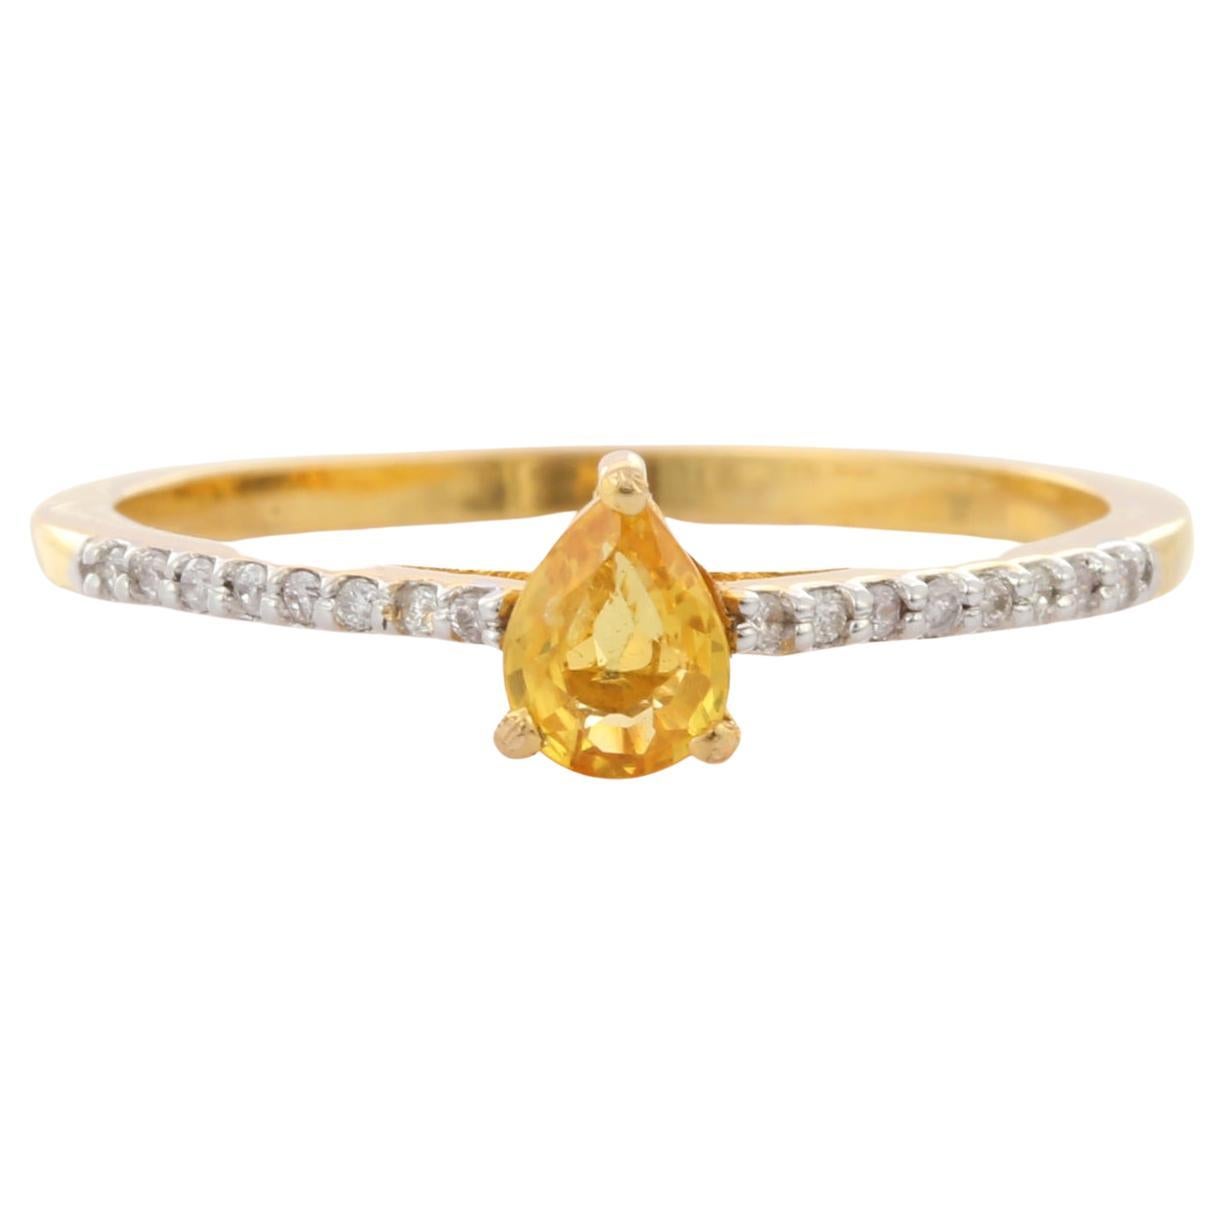 For Sale:  Pear Cut Yellow Sapphire and Diamond Statement Ring in 14K Yellow Gold